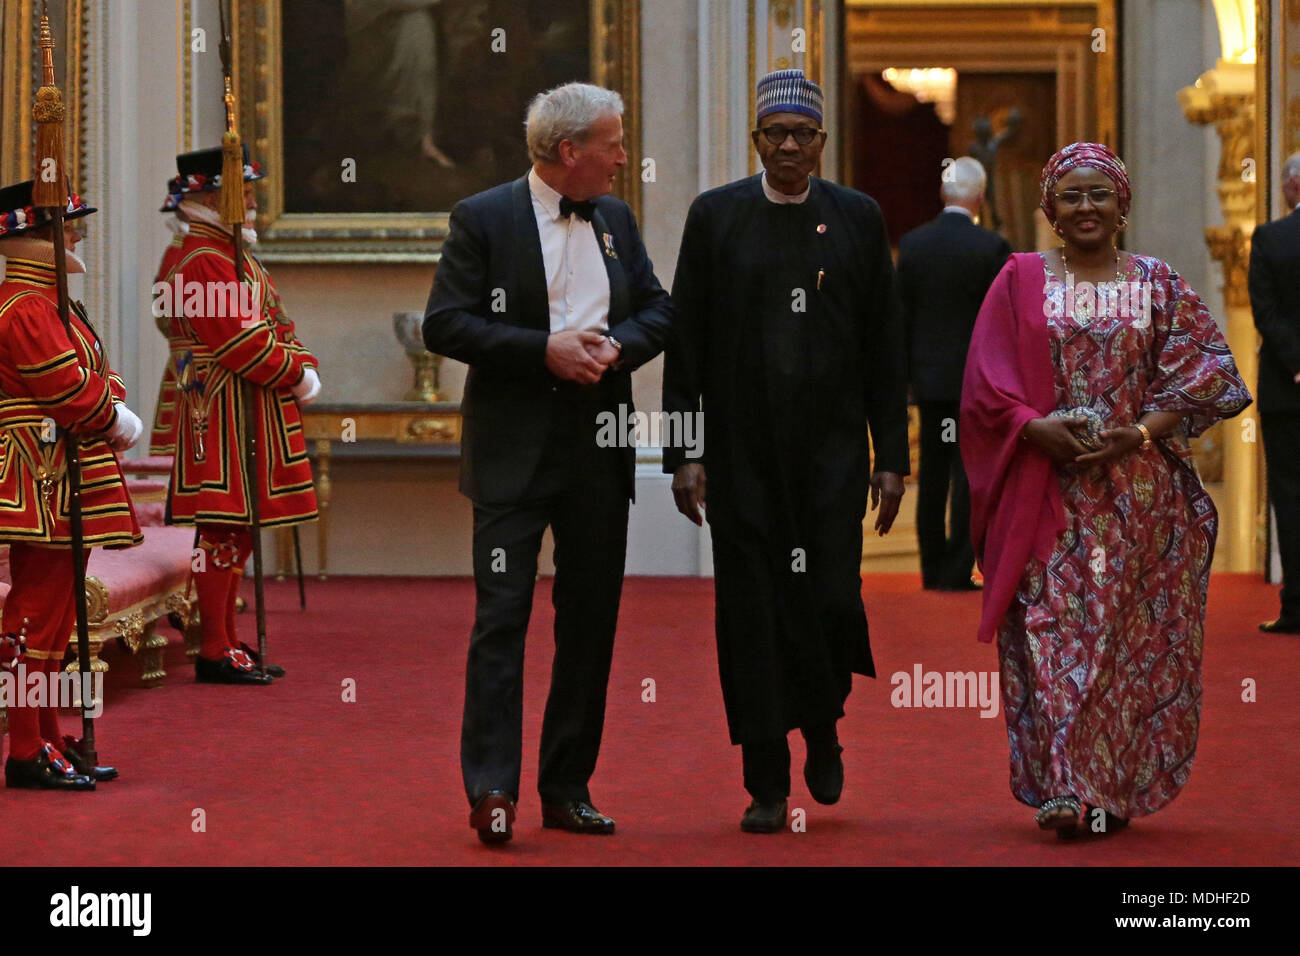 Nigeria's President Muhammadu Buhari (centre) and his wife Aisha arrive in the East Gallery at Buckingham Palace in London as Queen Elizabeth II hosts a dinner during the Commonwealth Heads of Government Meeting. Stock Photo